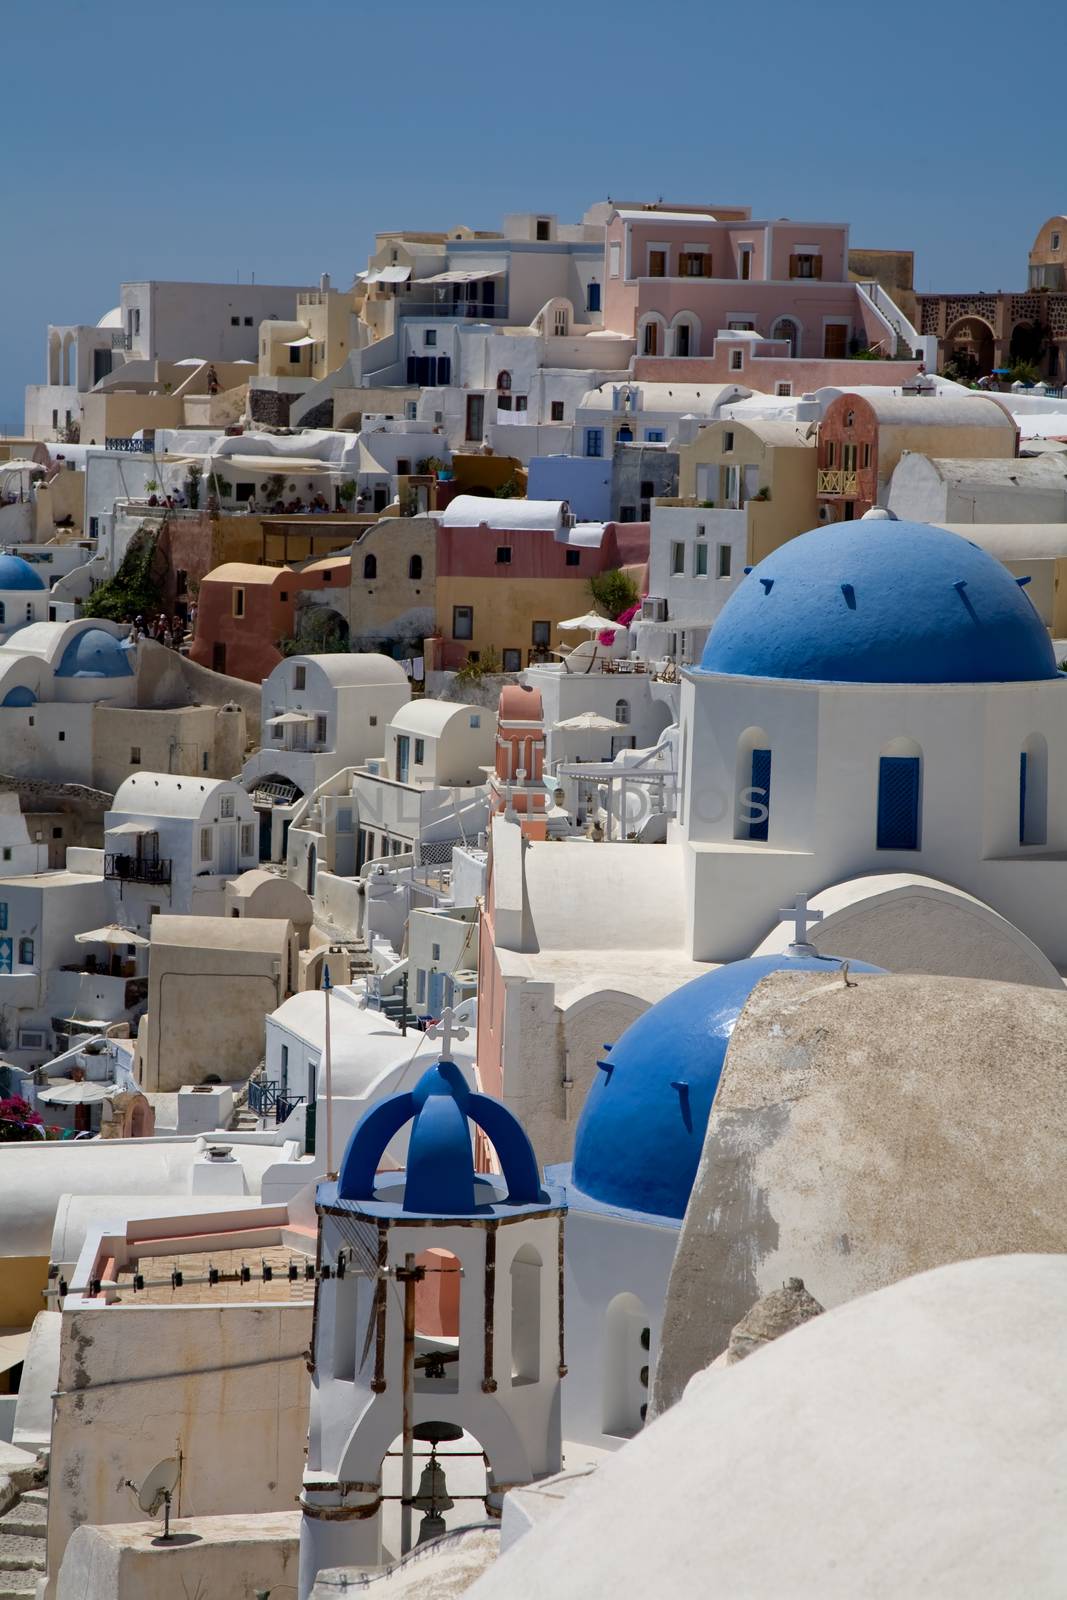 view of Oia at the greek island of Santorini